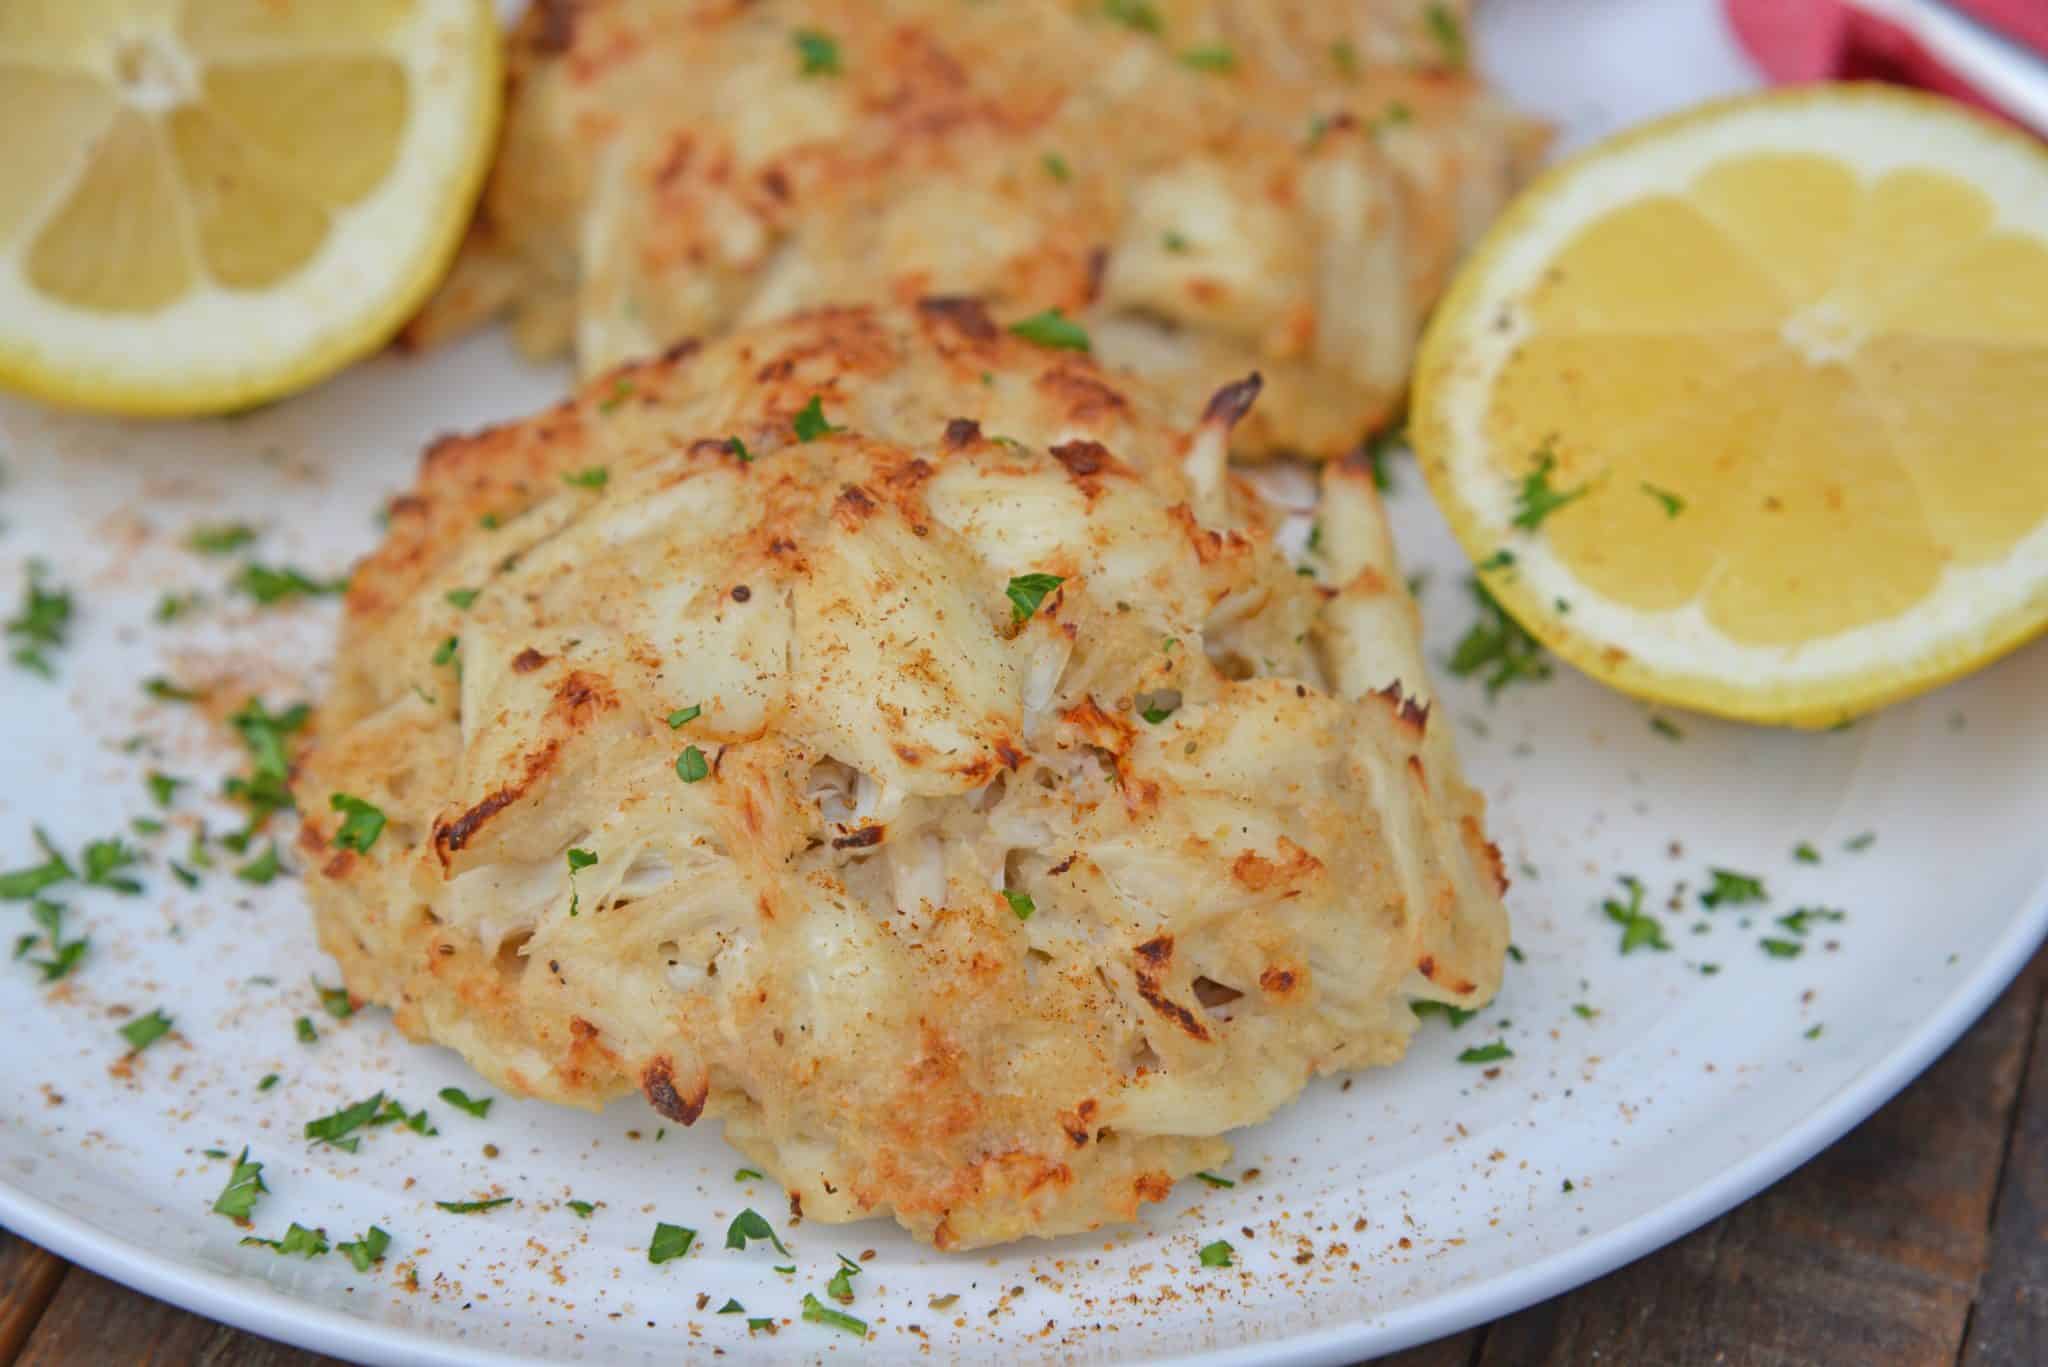 Who Has The Best Crab Cakes Near Me - GreenStarCandy